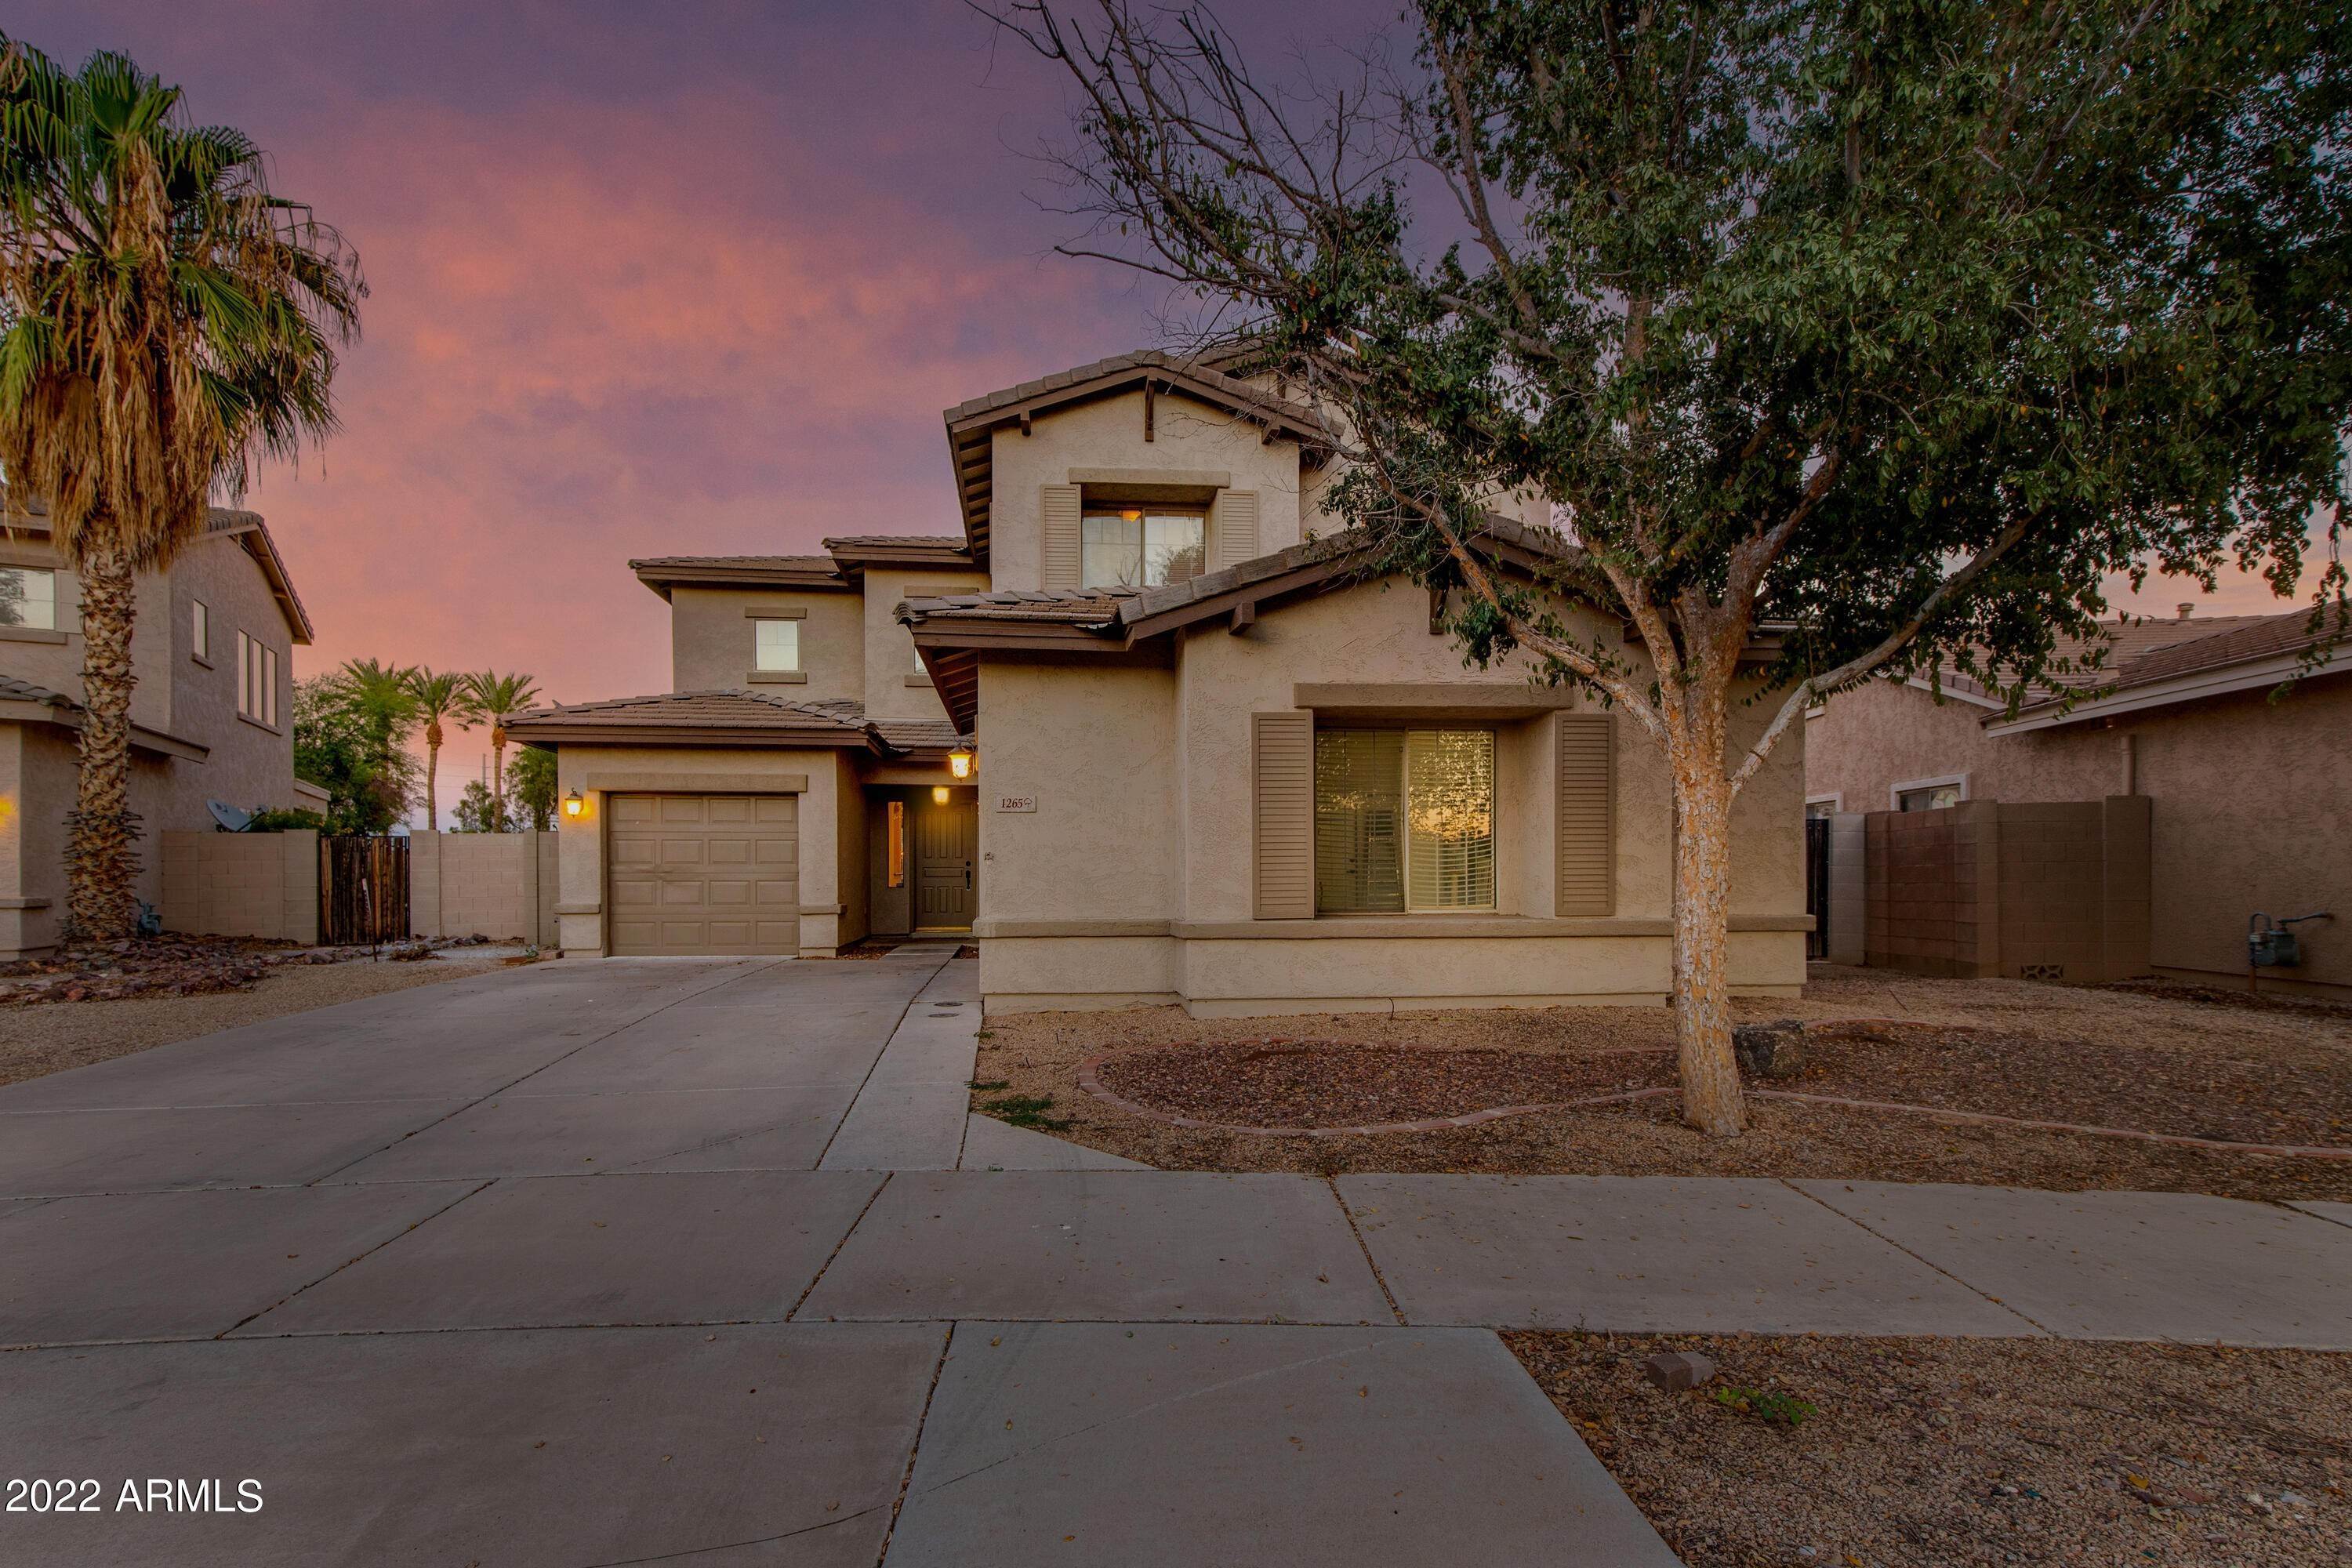 48. Single Family for Sale at Goodyear, AZ 85338